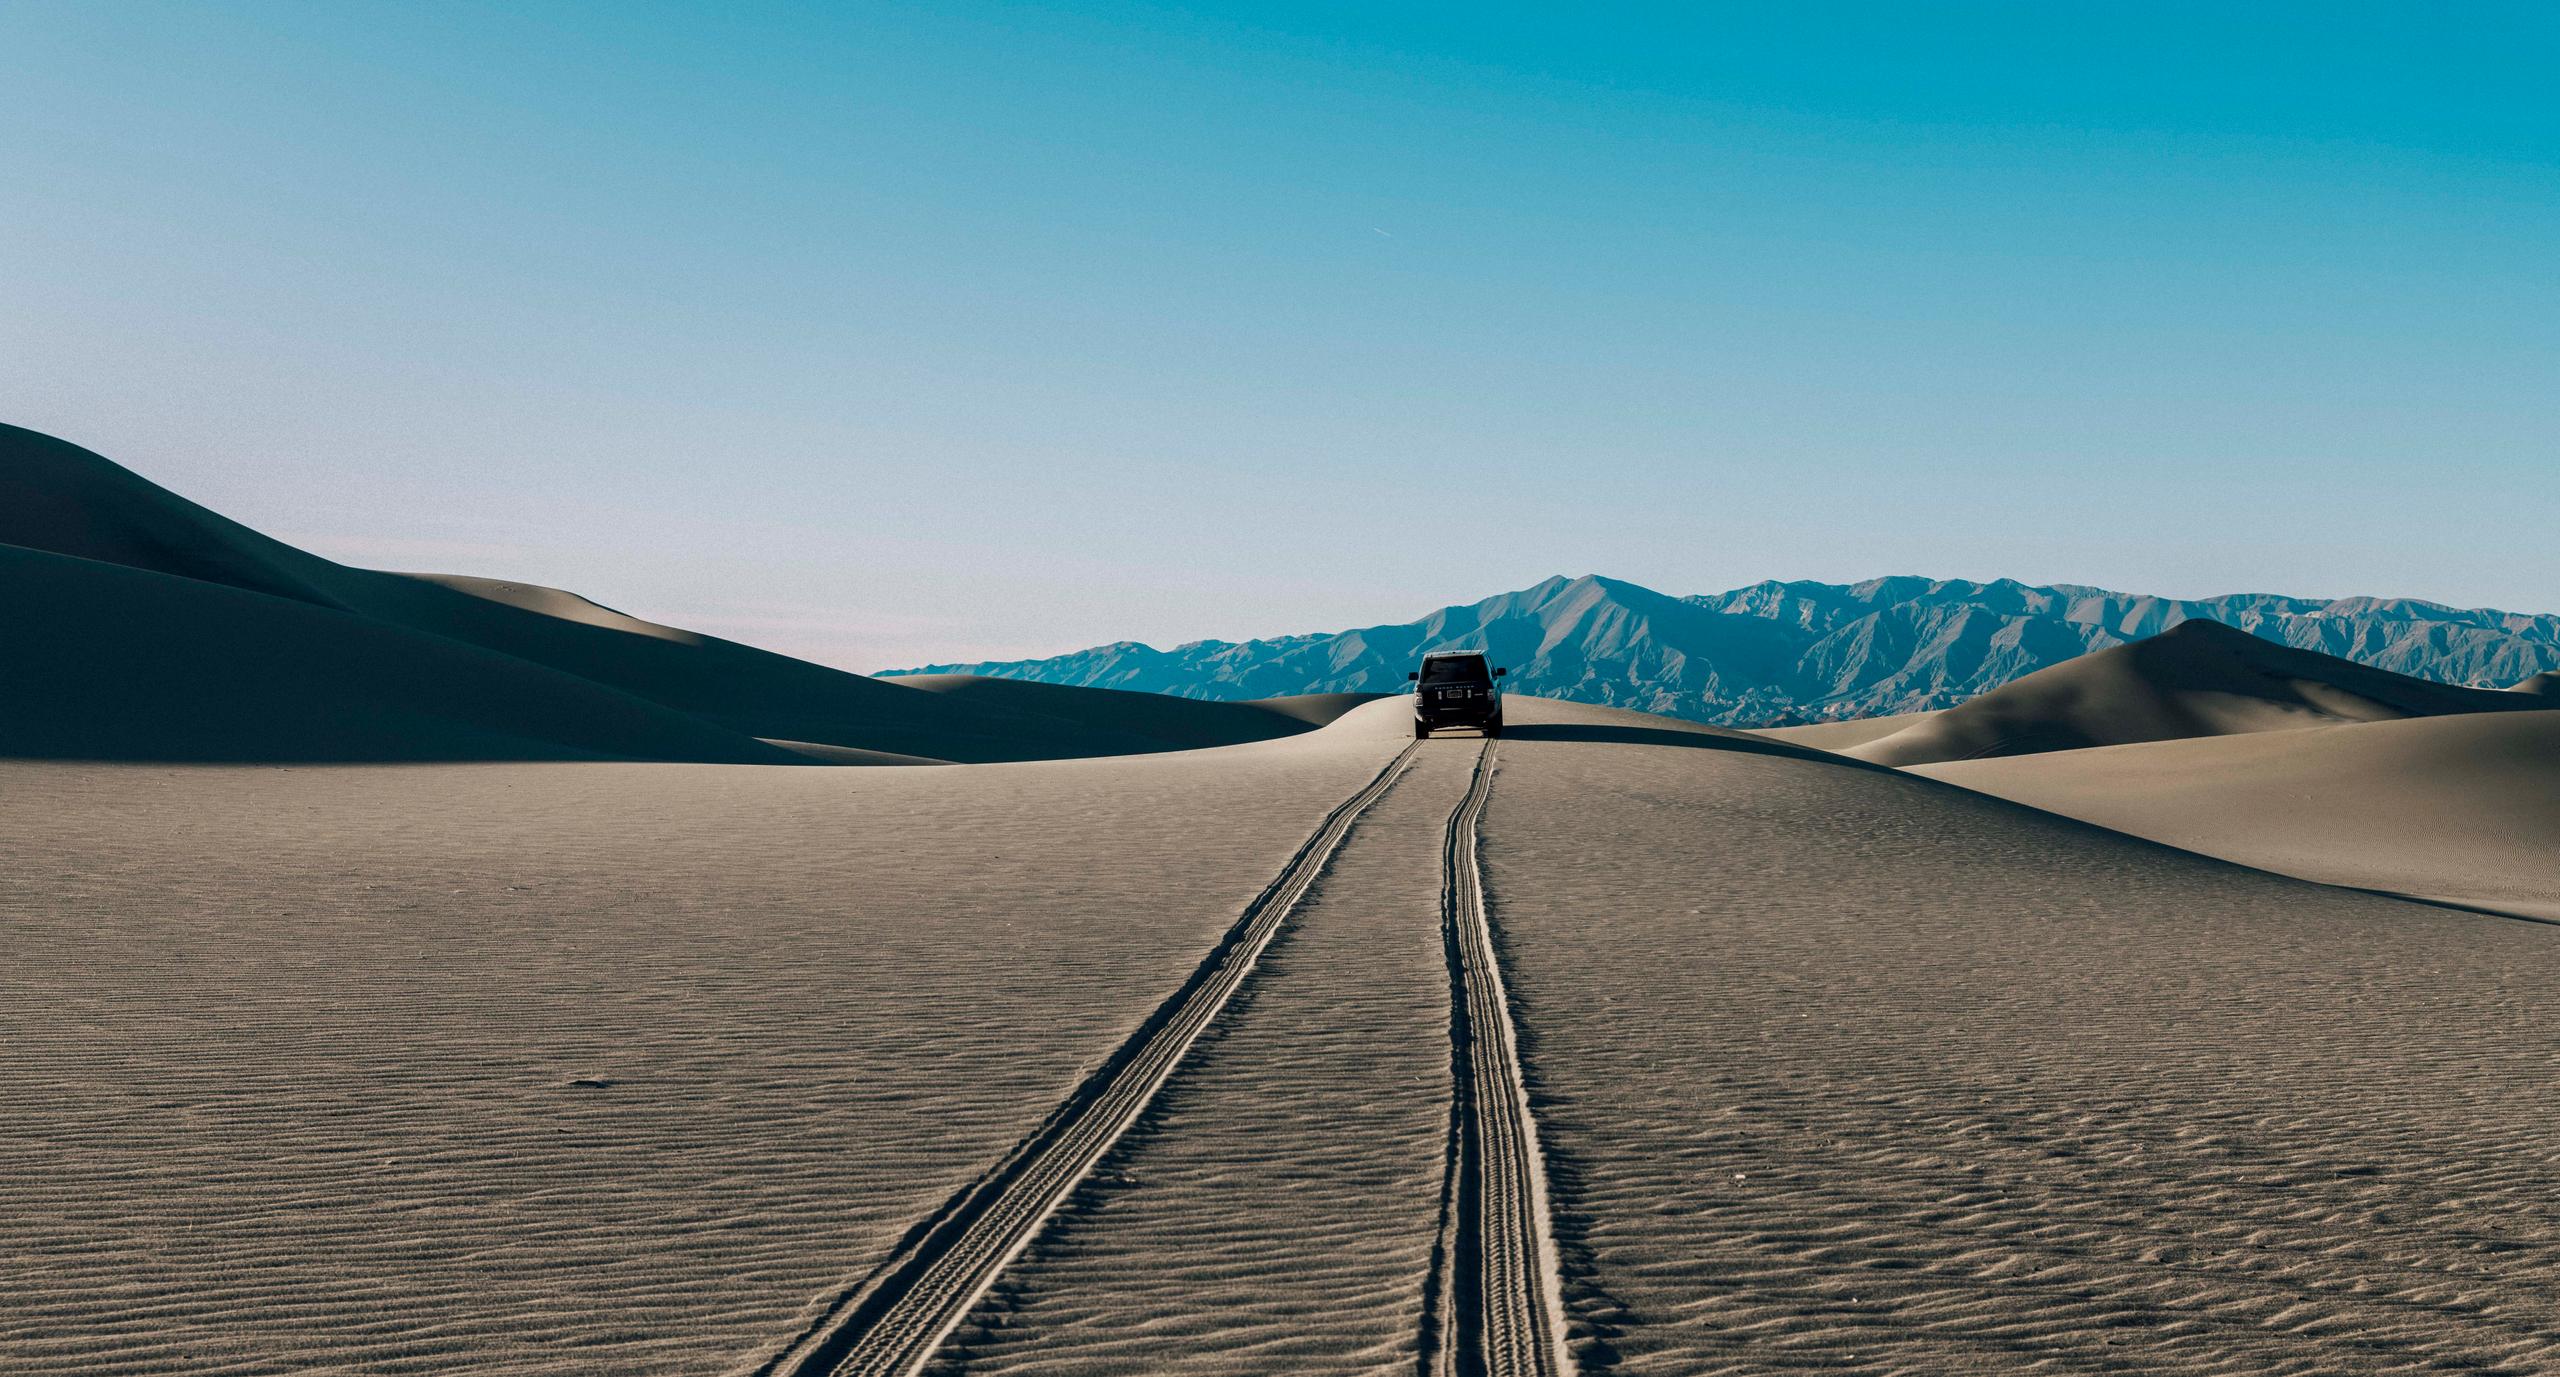 Car moving further in the desert